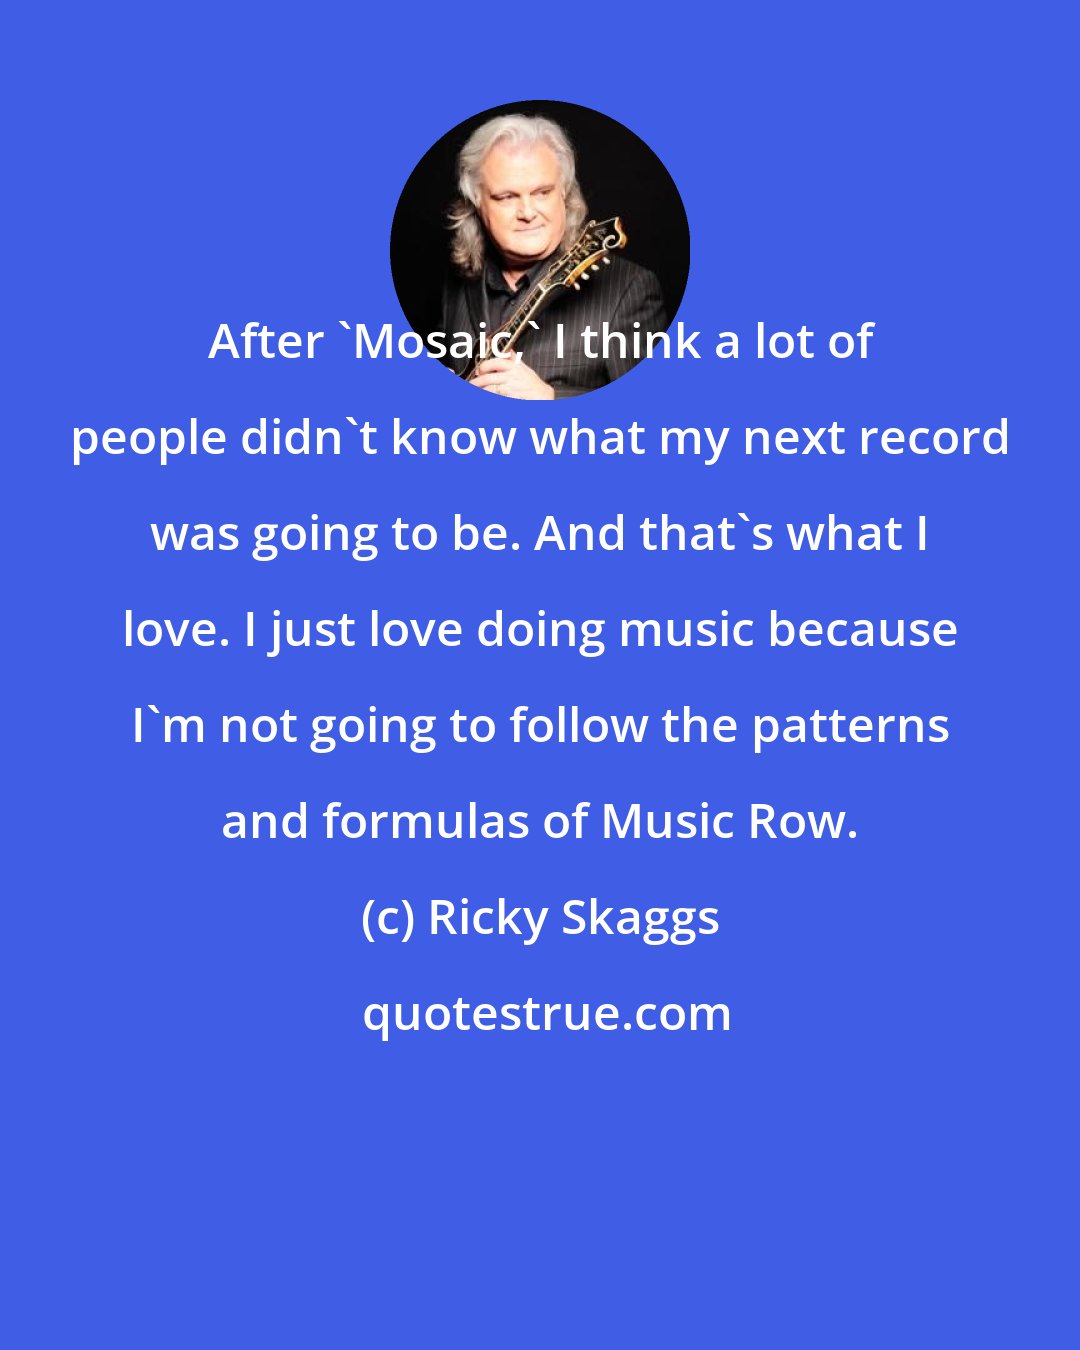 Ricky Skaggs: After 'Mosaic,' I think a lot of people didn't know what my next record was going to be. And that's what I love. I just love doing music because I'm not going to follow the patterns and formulas of Music Row.